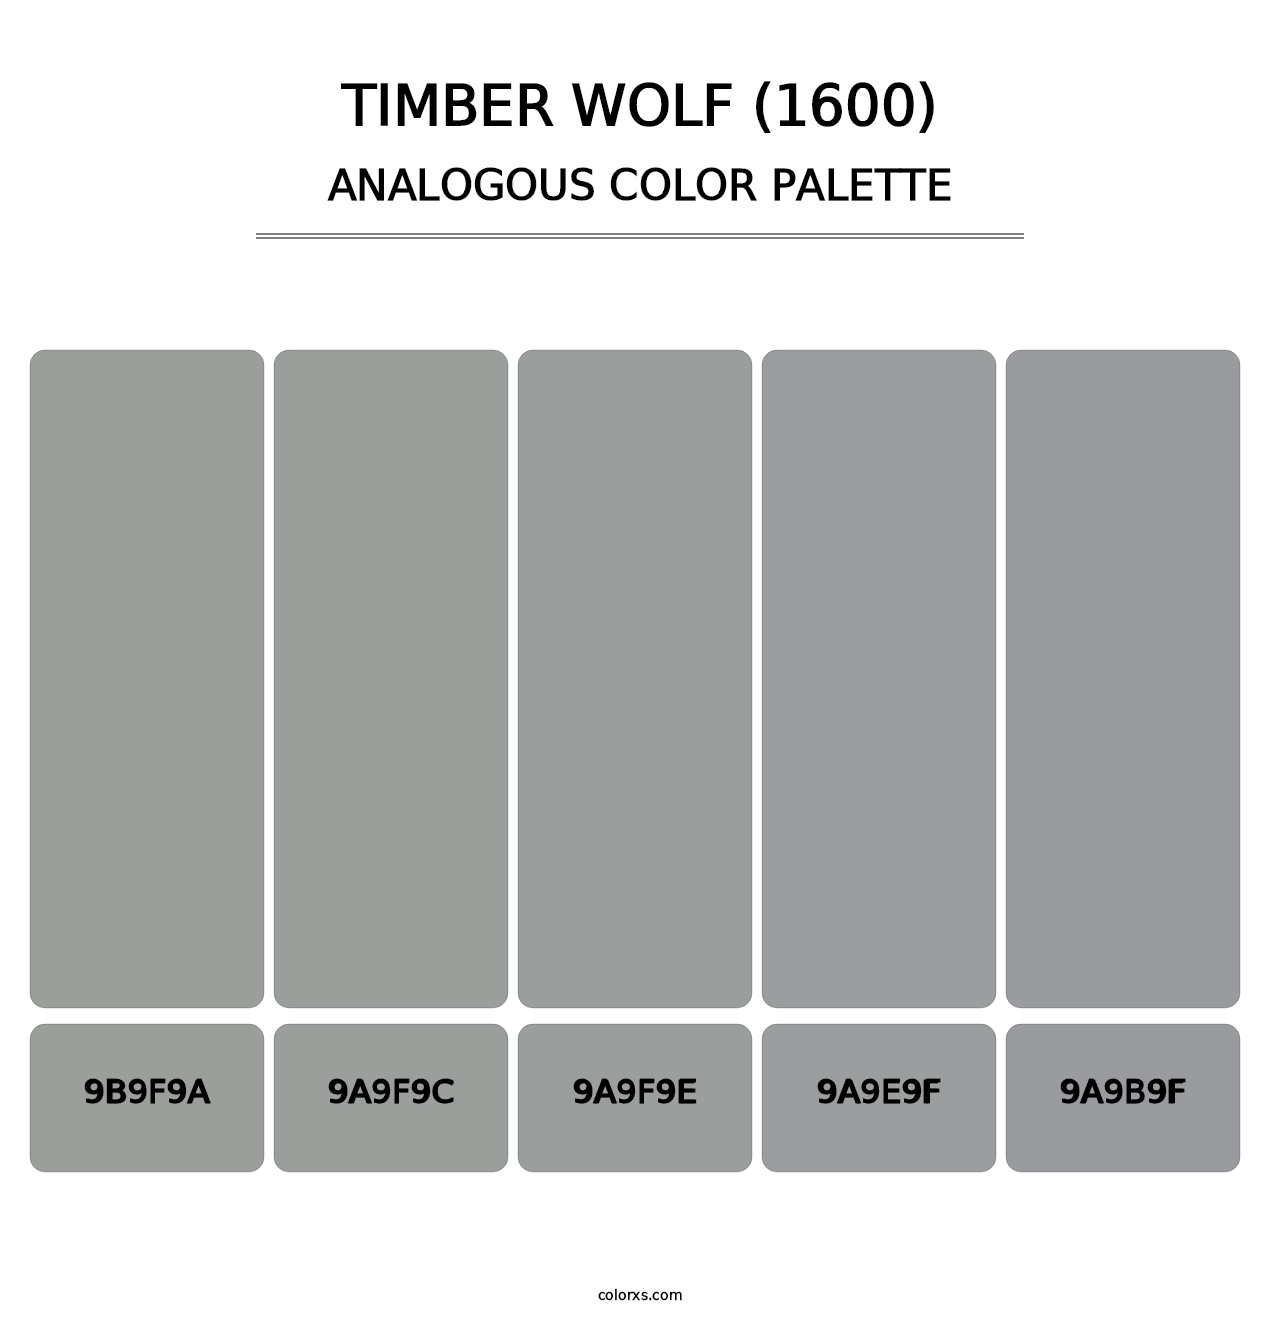 Timber Wolf (1600) - Analogous Color Palette